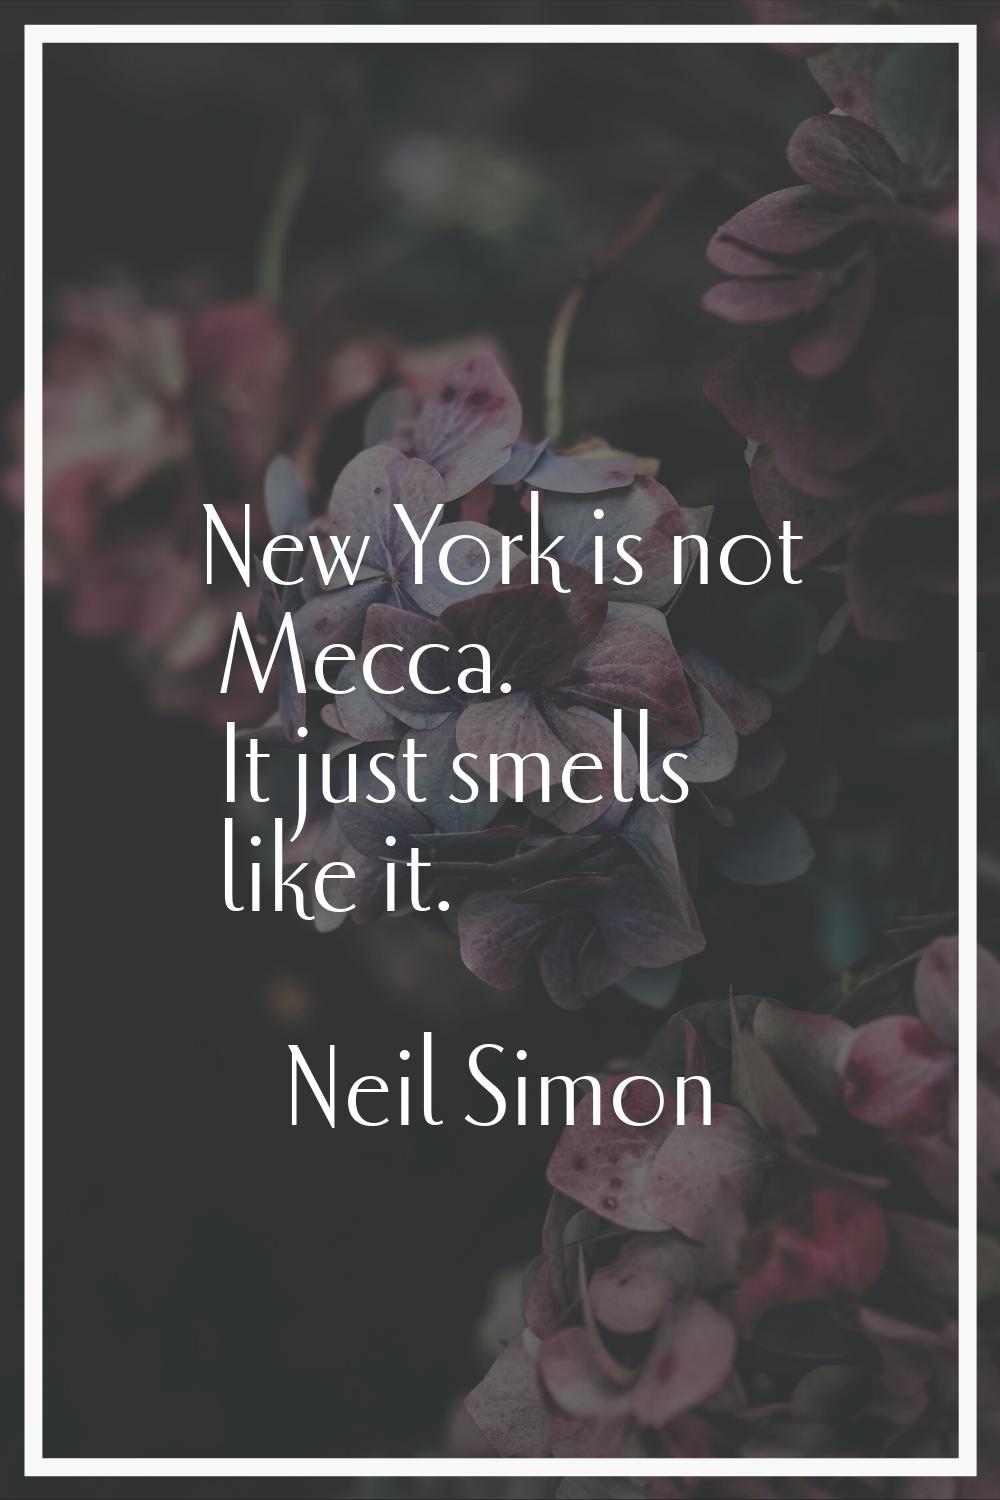 New York is not Mecca. It just smells like it.